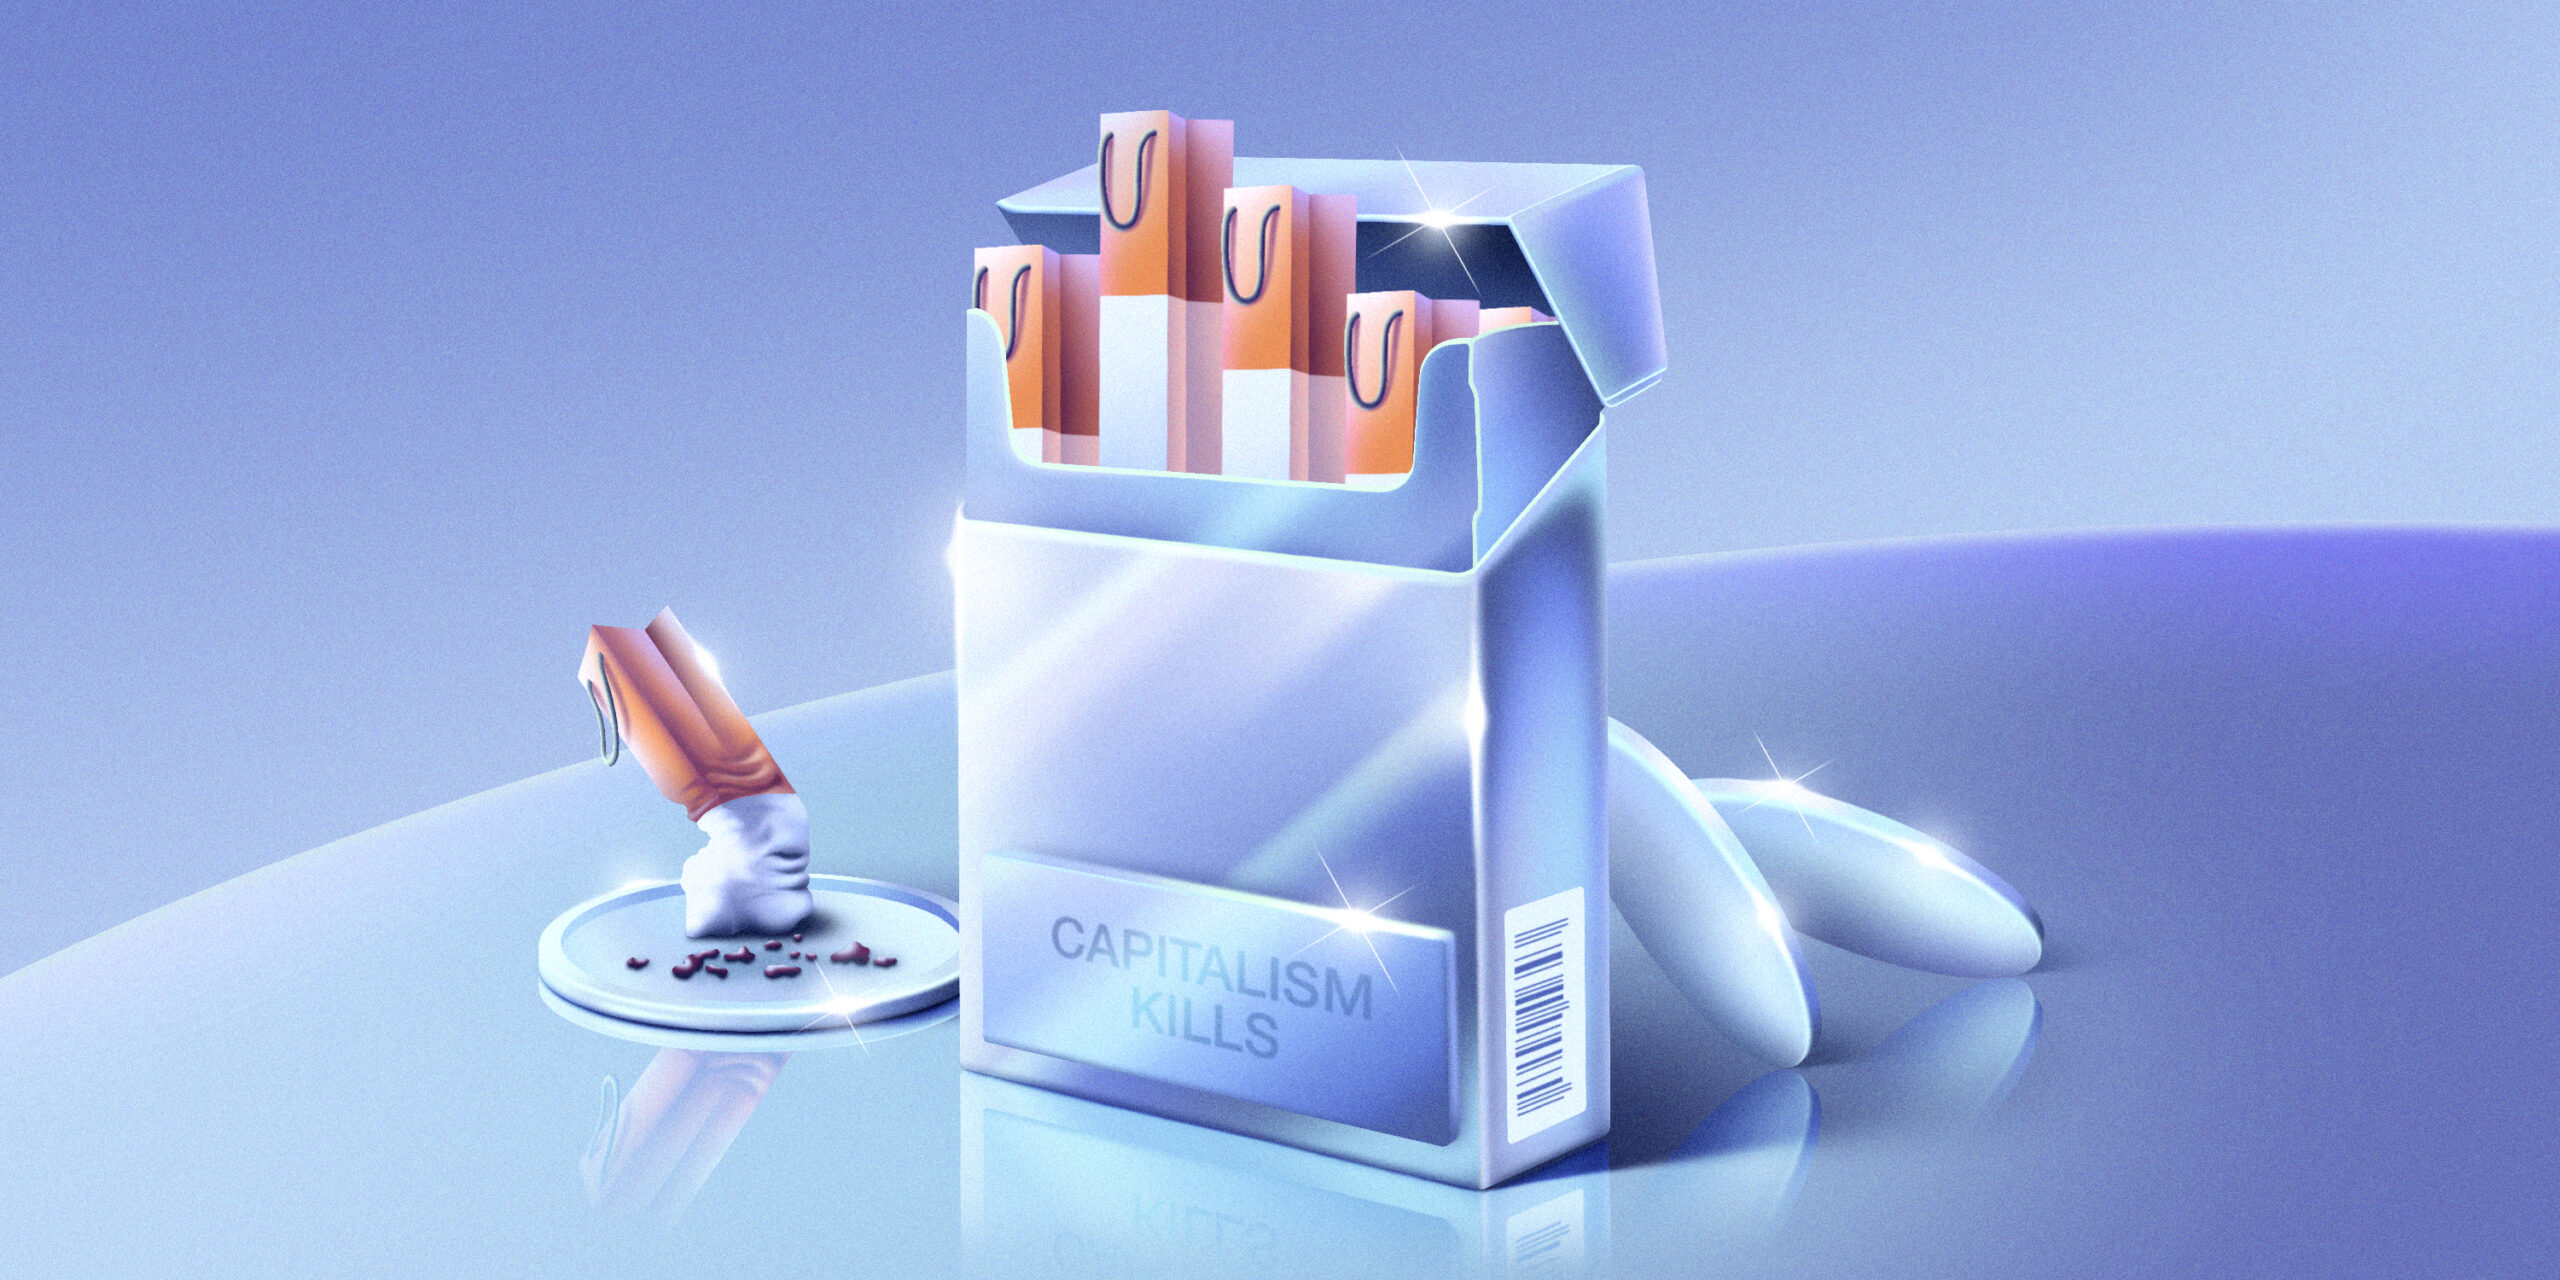 A chrome package of cigarettes with "Capitalism Kills" on the label. Each of the cigarettes is a shopping back. One has been "put out" on a silver coin to the left, and two more silver coins lean against the back of the box.